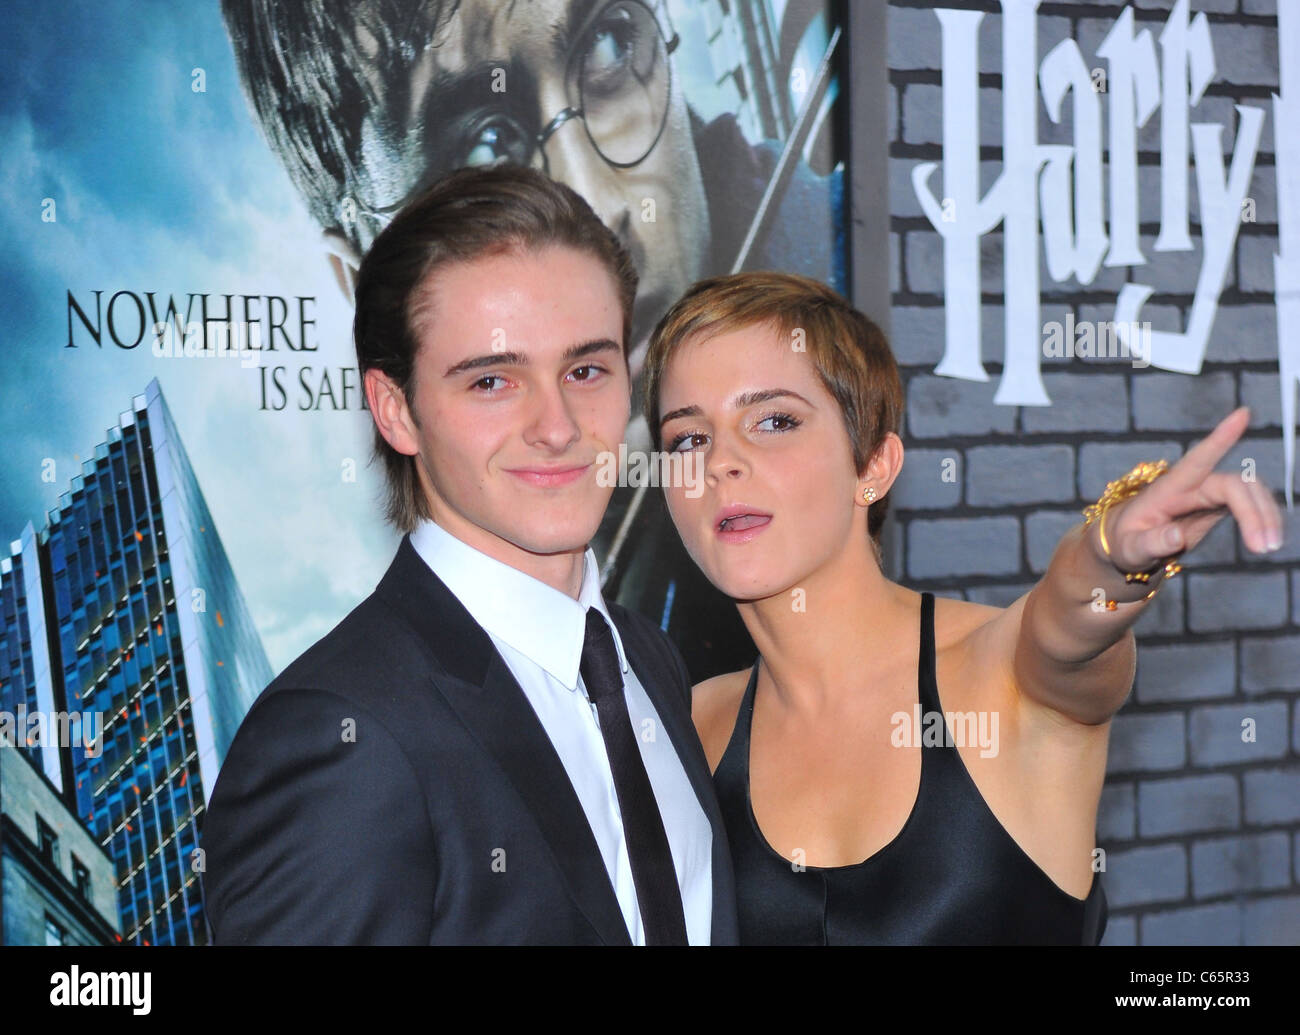 Alex Watson, Emma Watson at arrivals for HARRY POTTER AND THE DEATHLY HALLOWS: PART 1 Premiere, Alice Tully Hall at Lincoln Center, New York, NY November 15, 2010. Photo By: Gregorio T. Binuya/Everett Collection Stock Photo